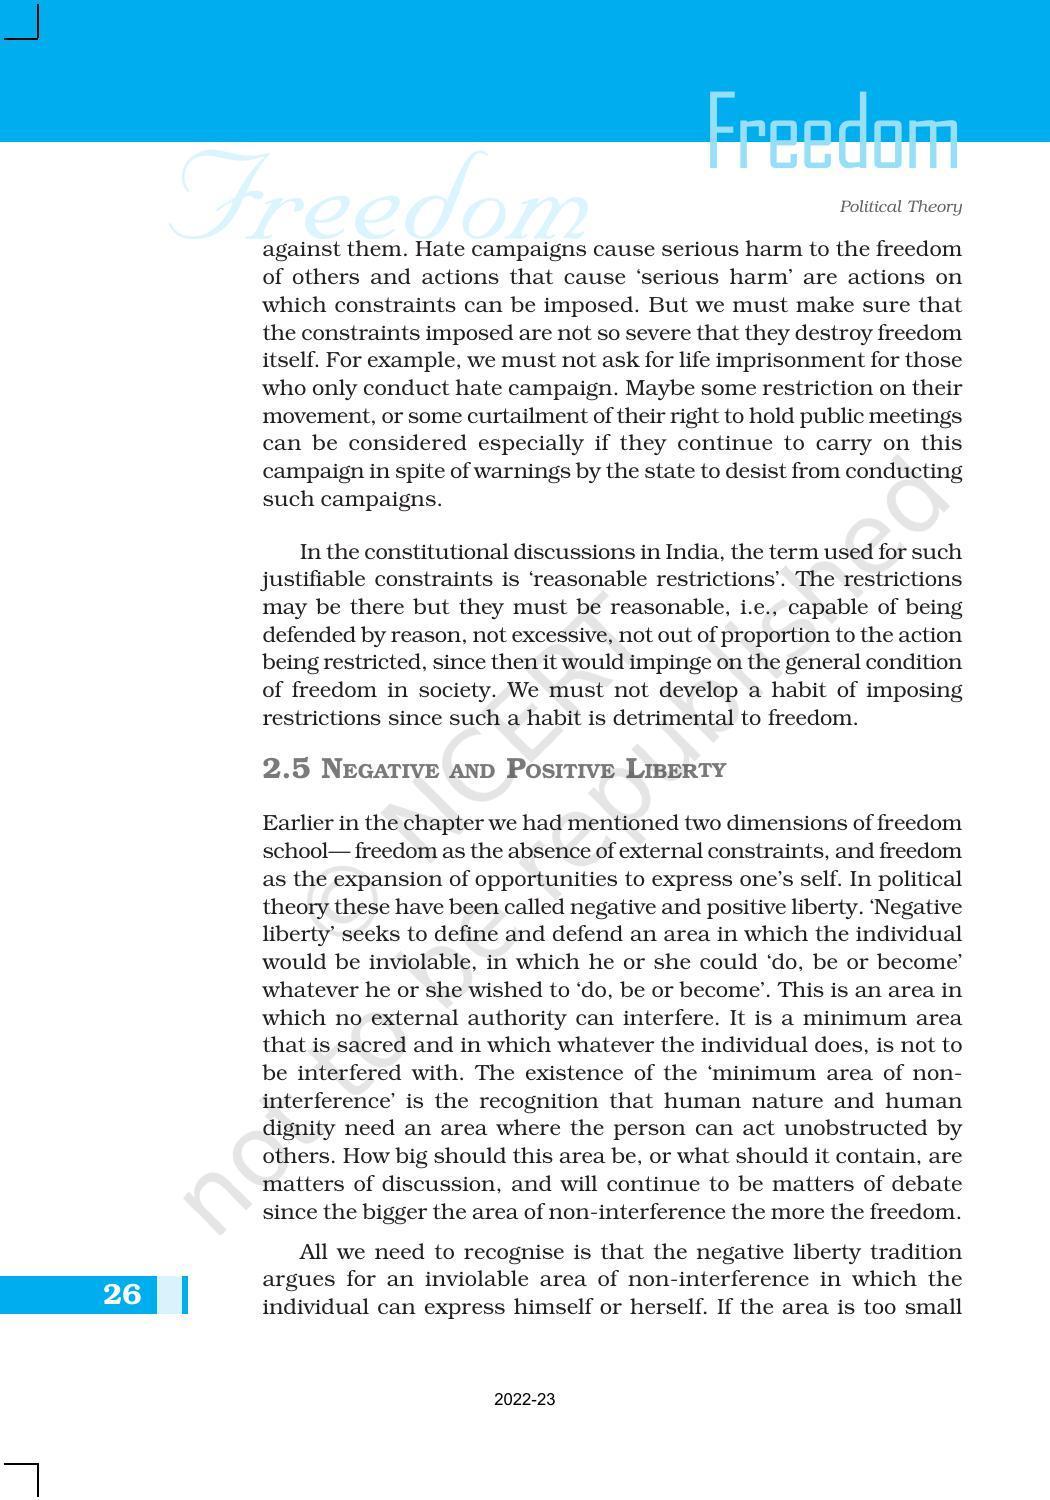 NCERT Book for Class 11 Political Science (Political Theory) Chapter 2 Freedom - Page 10